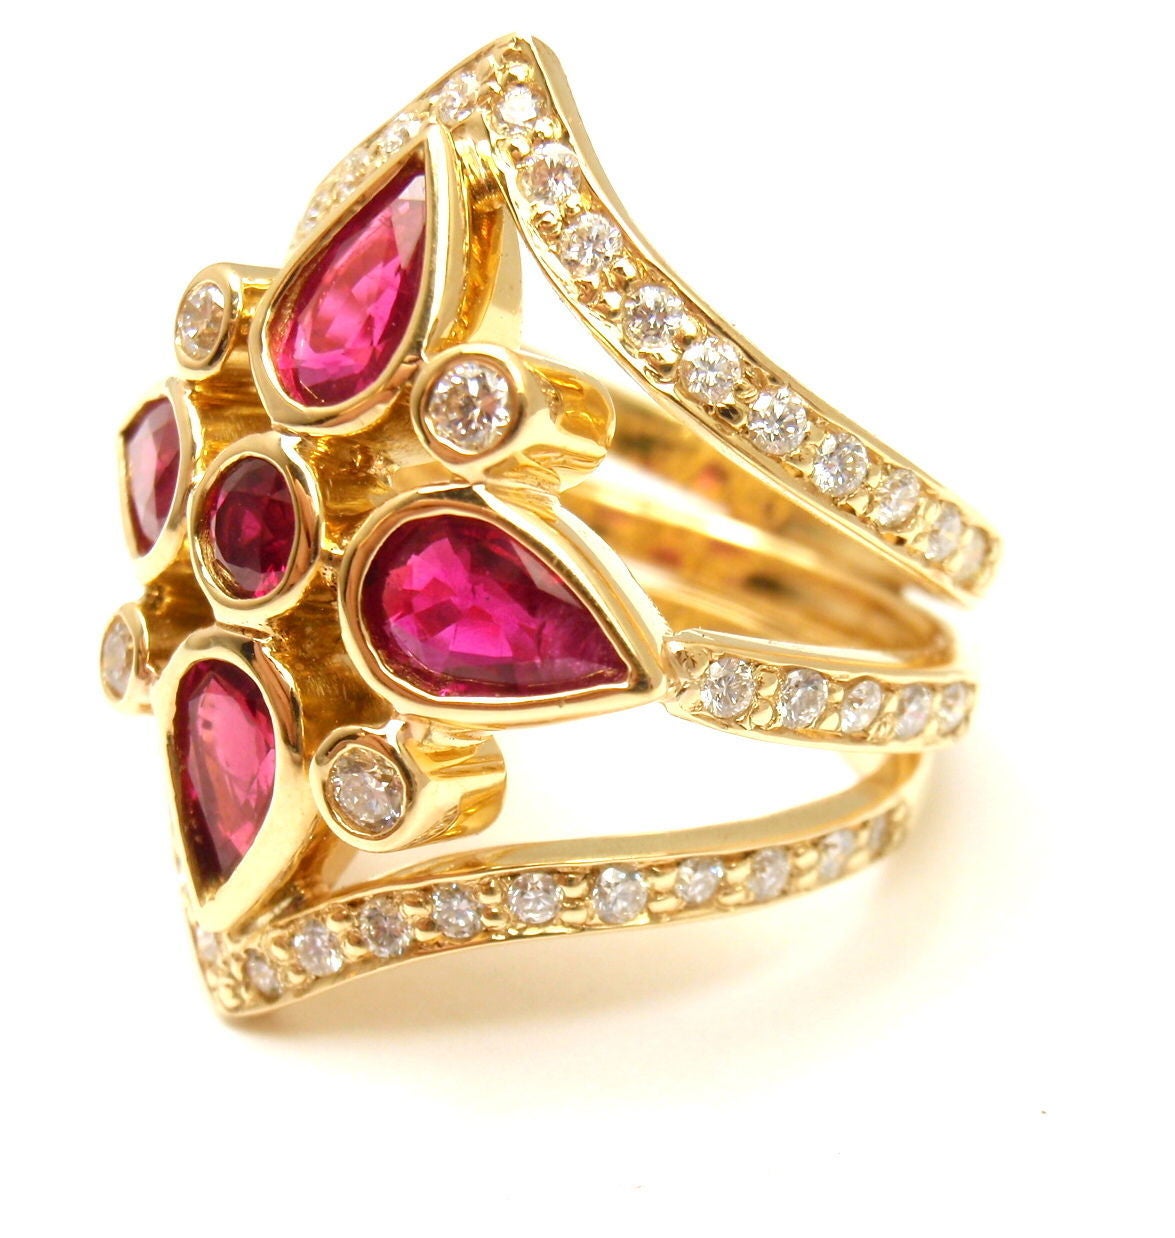 18k Yellow Gold Diamond & Ruby Persia Ring by Temple St. Clair. 
With round brilliant cut diamonds total weight approx. .635ctw
5 rubies total weight approx. 2.14ctw
This ring comes with Temple St Clair pouch.

Details:
Ring Size: 6
Weight: